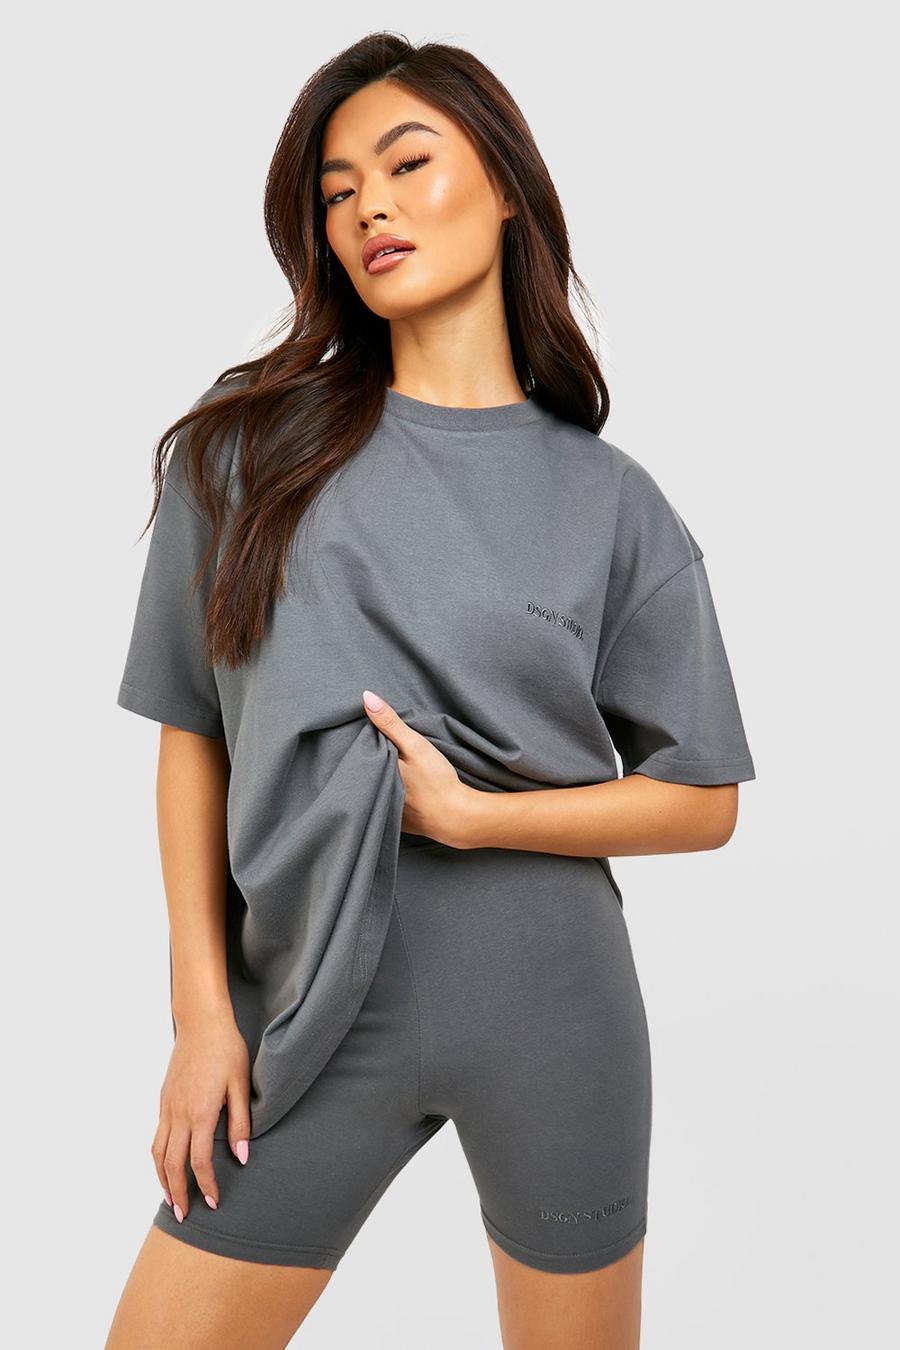 Charcoal Dsgn Studio Oversized T-shirt And Cycling Short Set